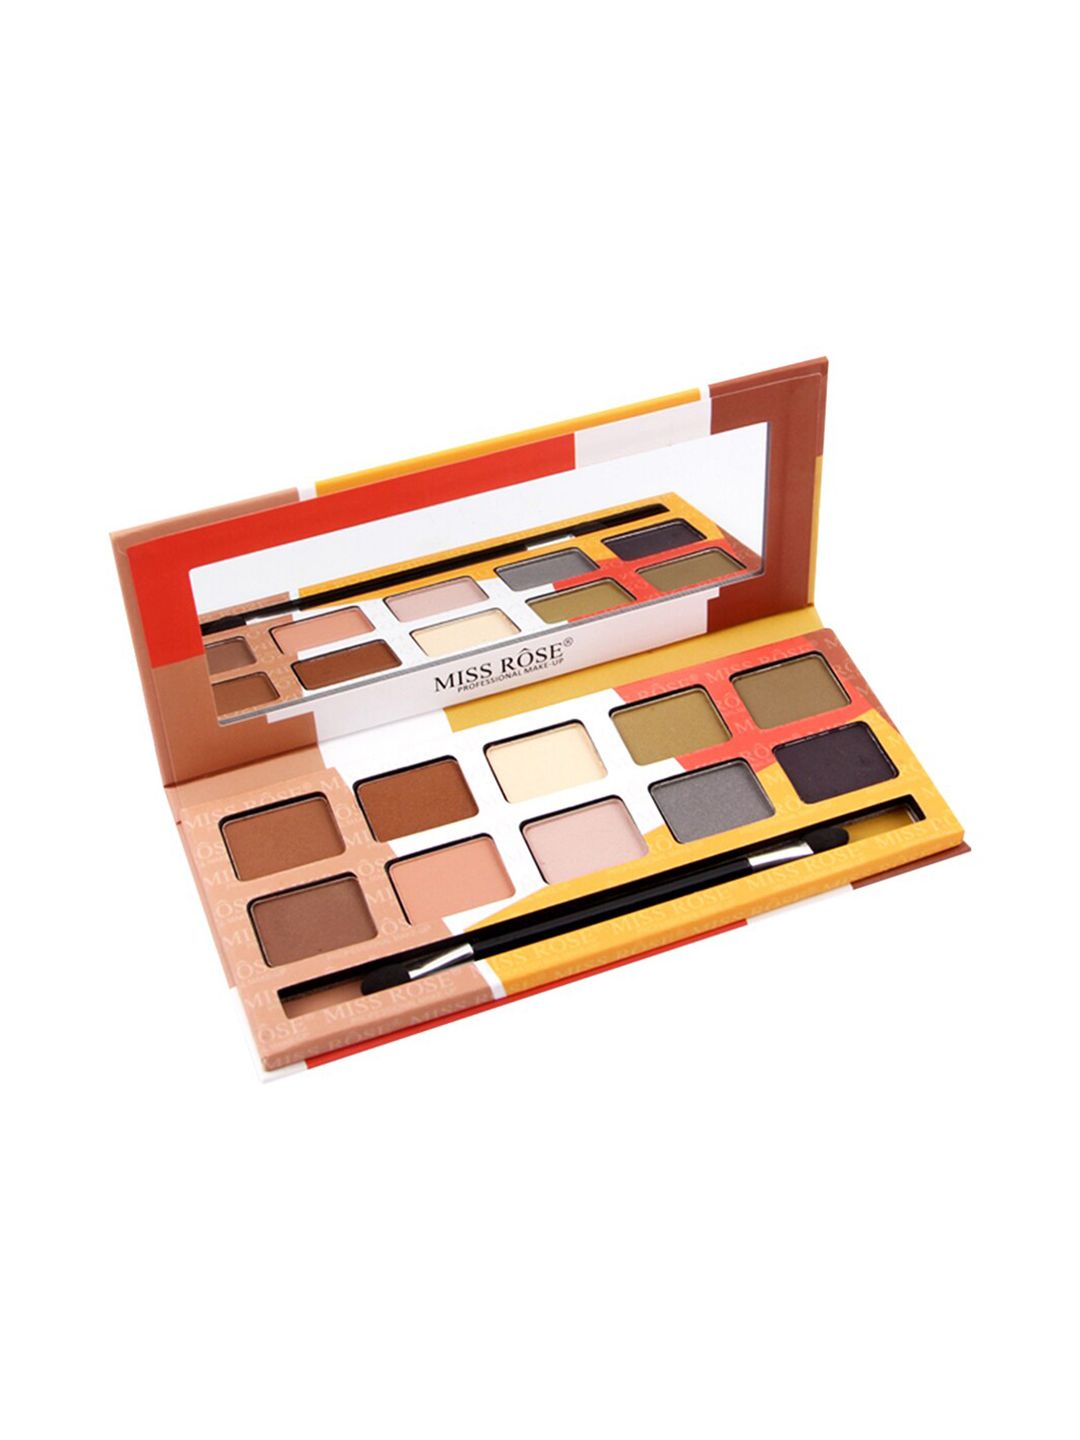 MISS ROSE 12 Color Nude Eyeshadow Palette 7001-051 01 Price in India